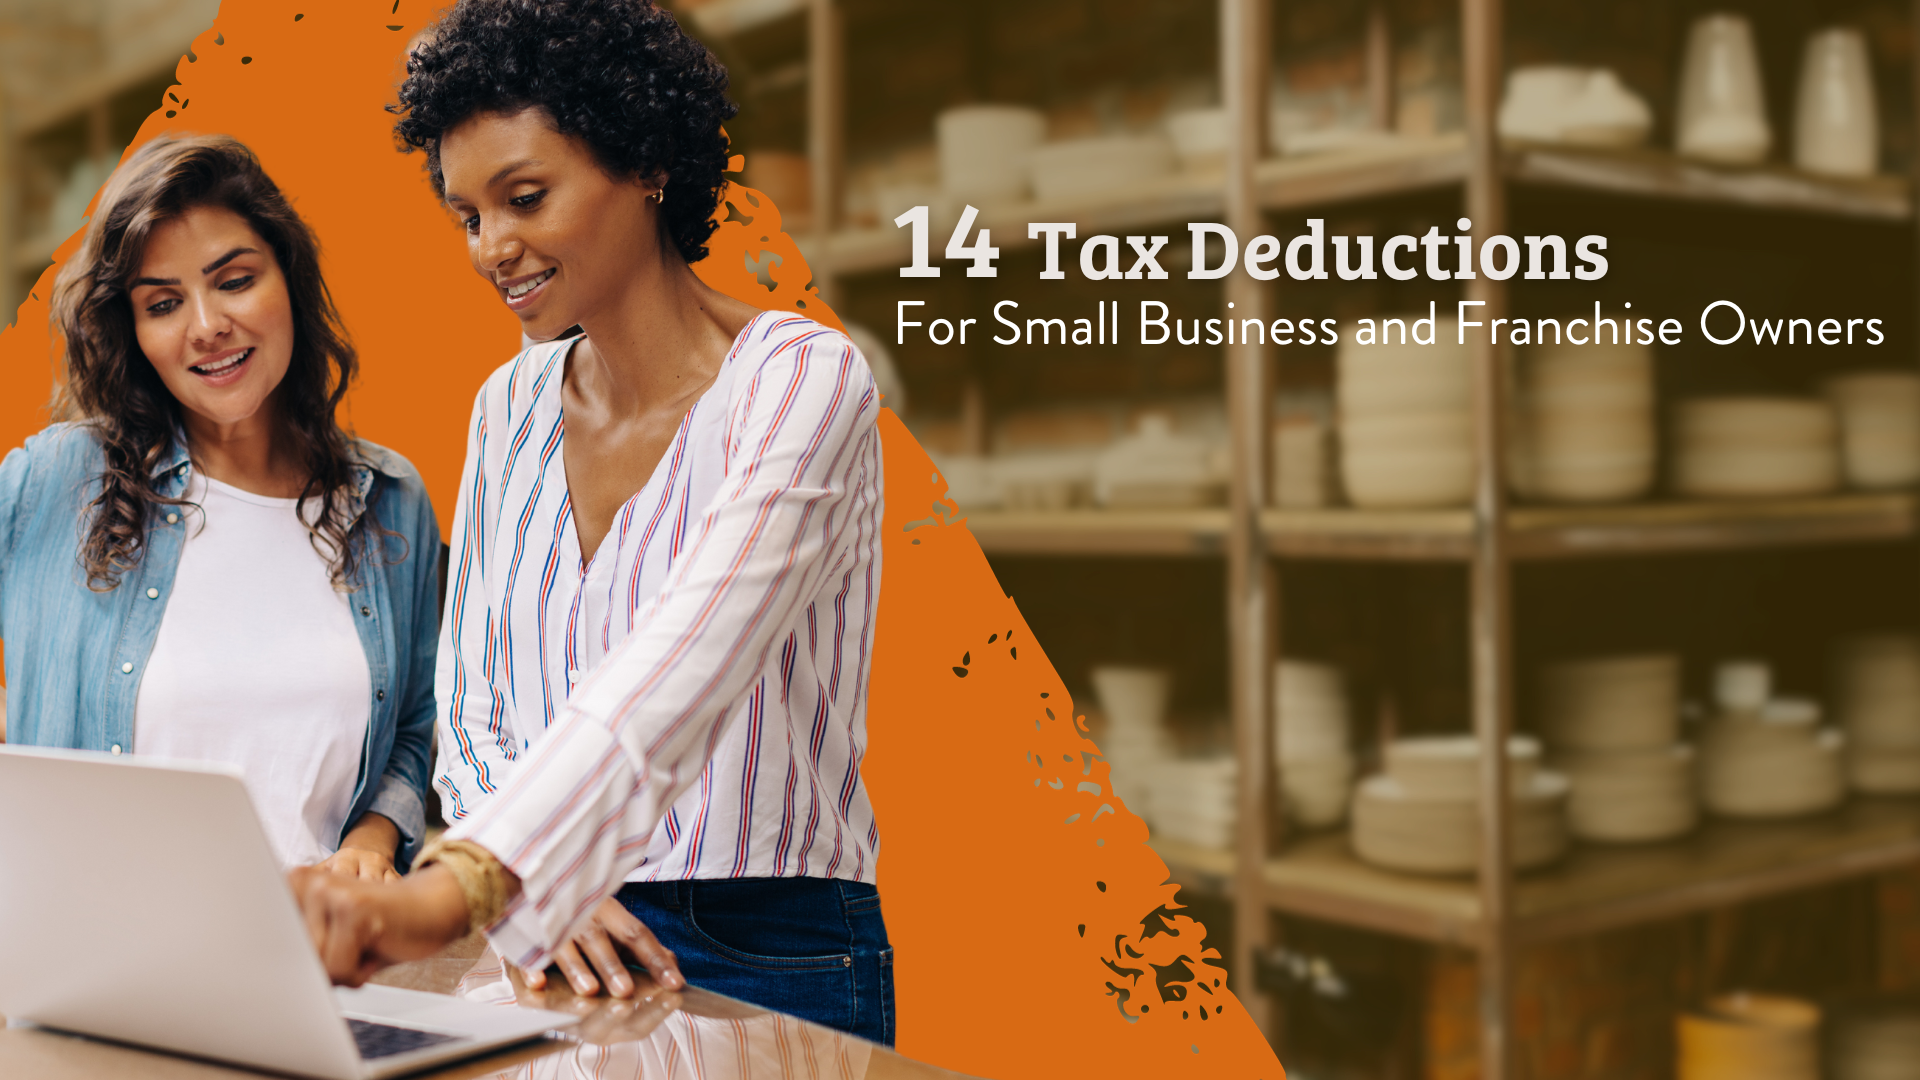 14 Tax Deductions For Small Business and Franchise Owners